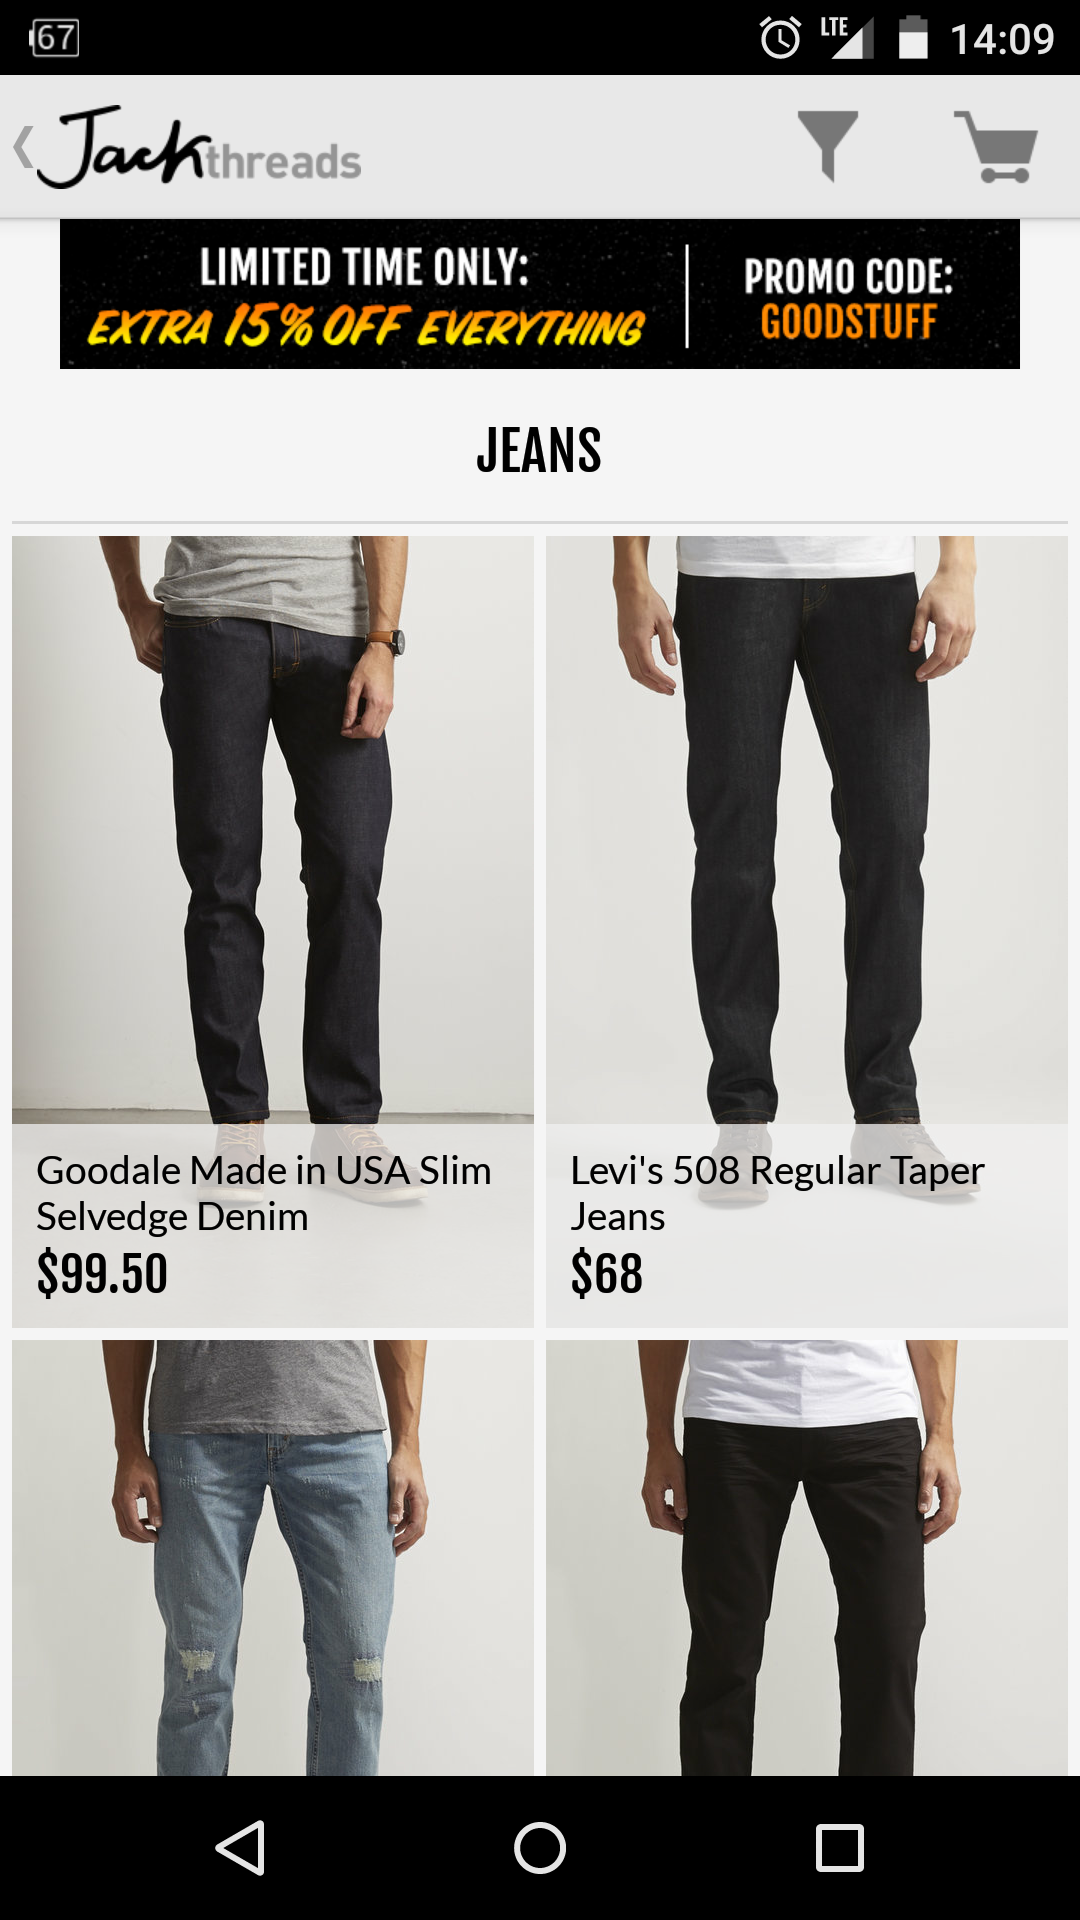 Jack Threads ListView with Filter